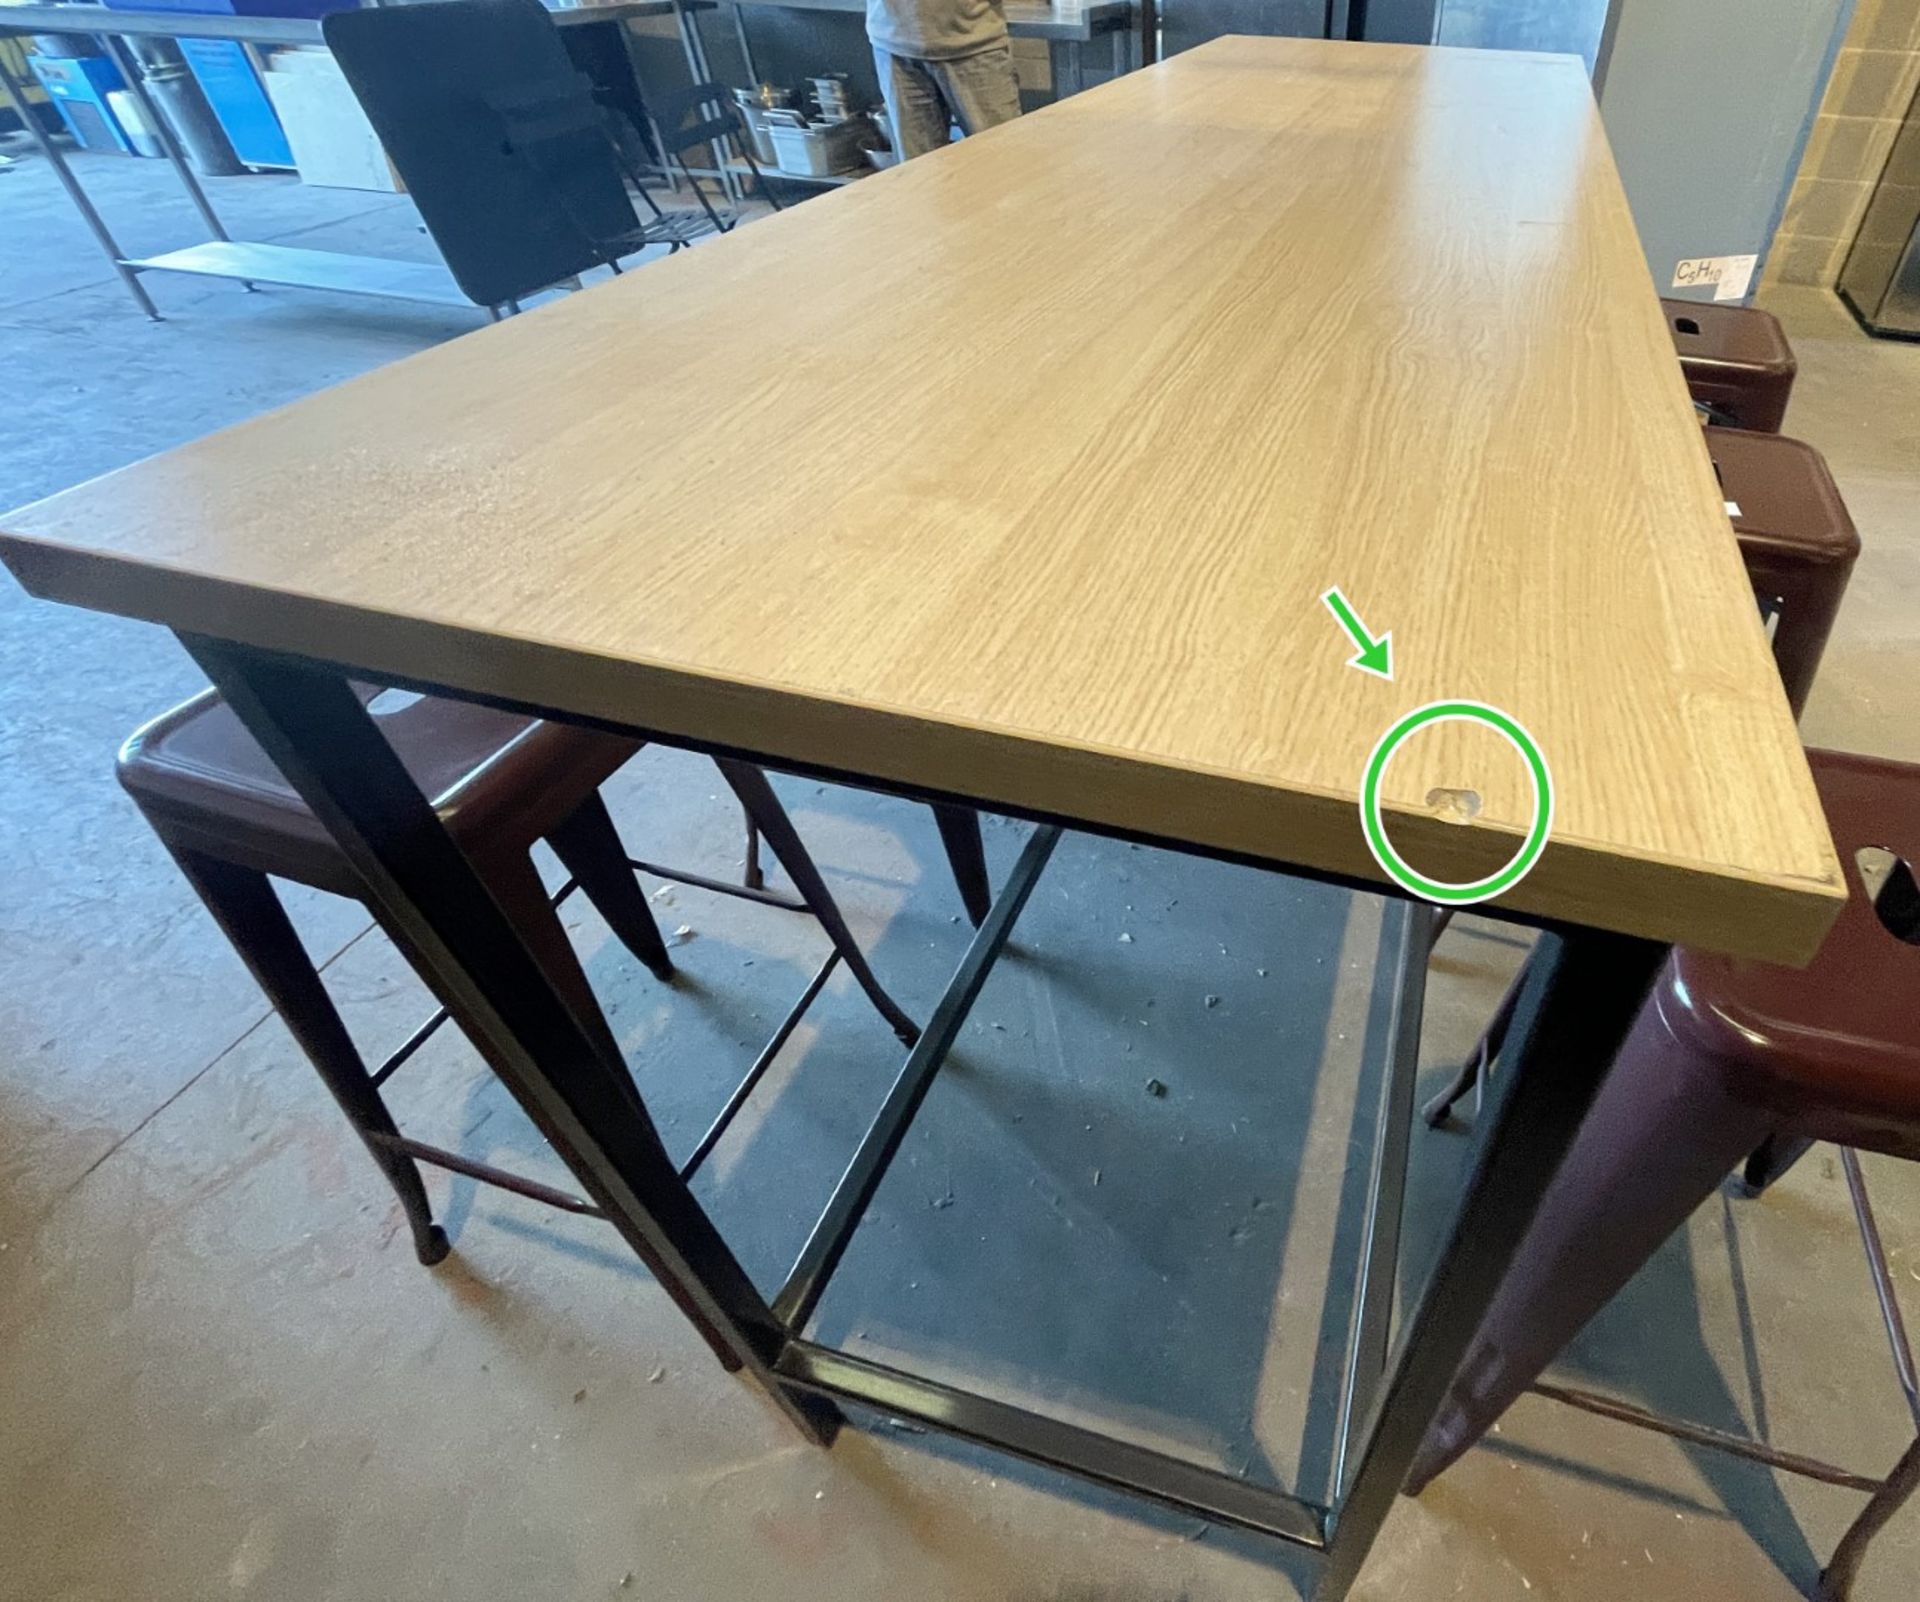 1 x Rectangular Bar Table And 6 x Metal Bar Stools - Ref: FGN068 - CL834 - Location: Essex, RM19 Dim - Image 4 of 9